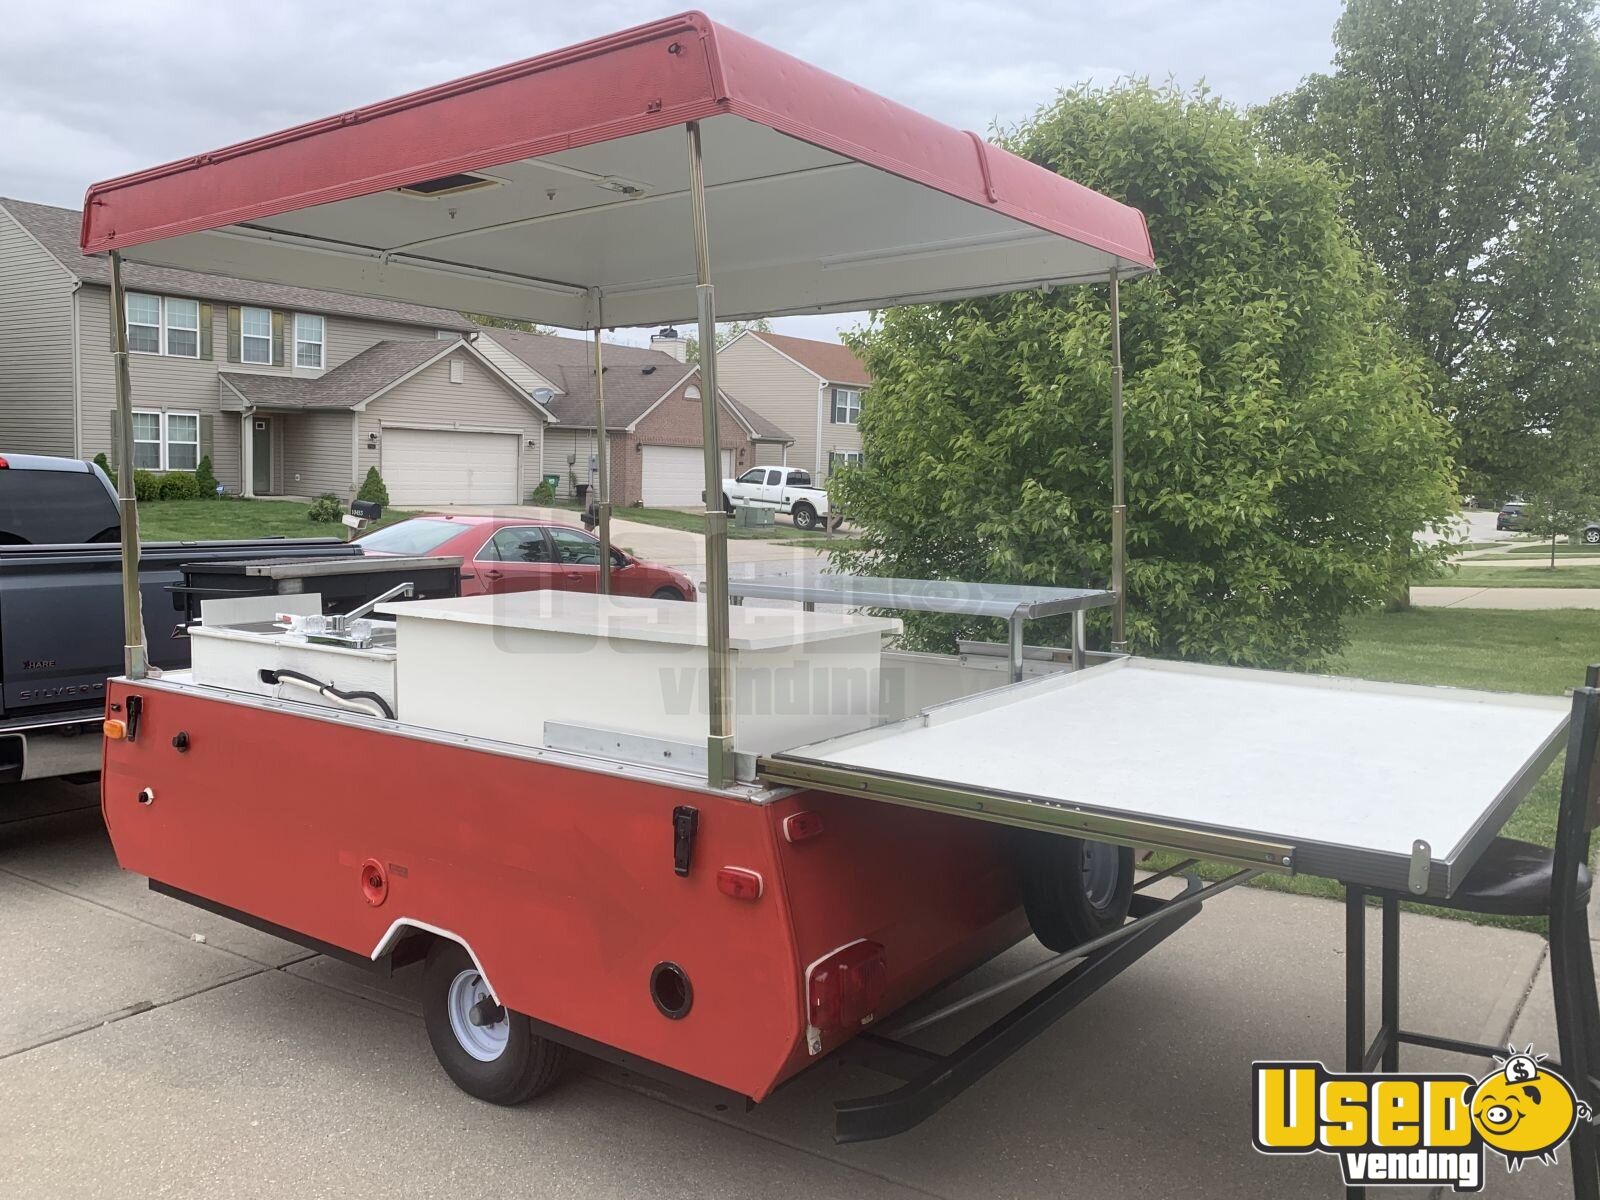 6 9 X 8 5 Pop Up Street Food Vending Concession Trailer Mobile Food Unit For Sale In Indiana